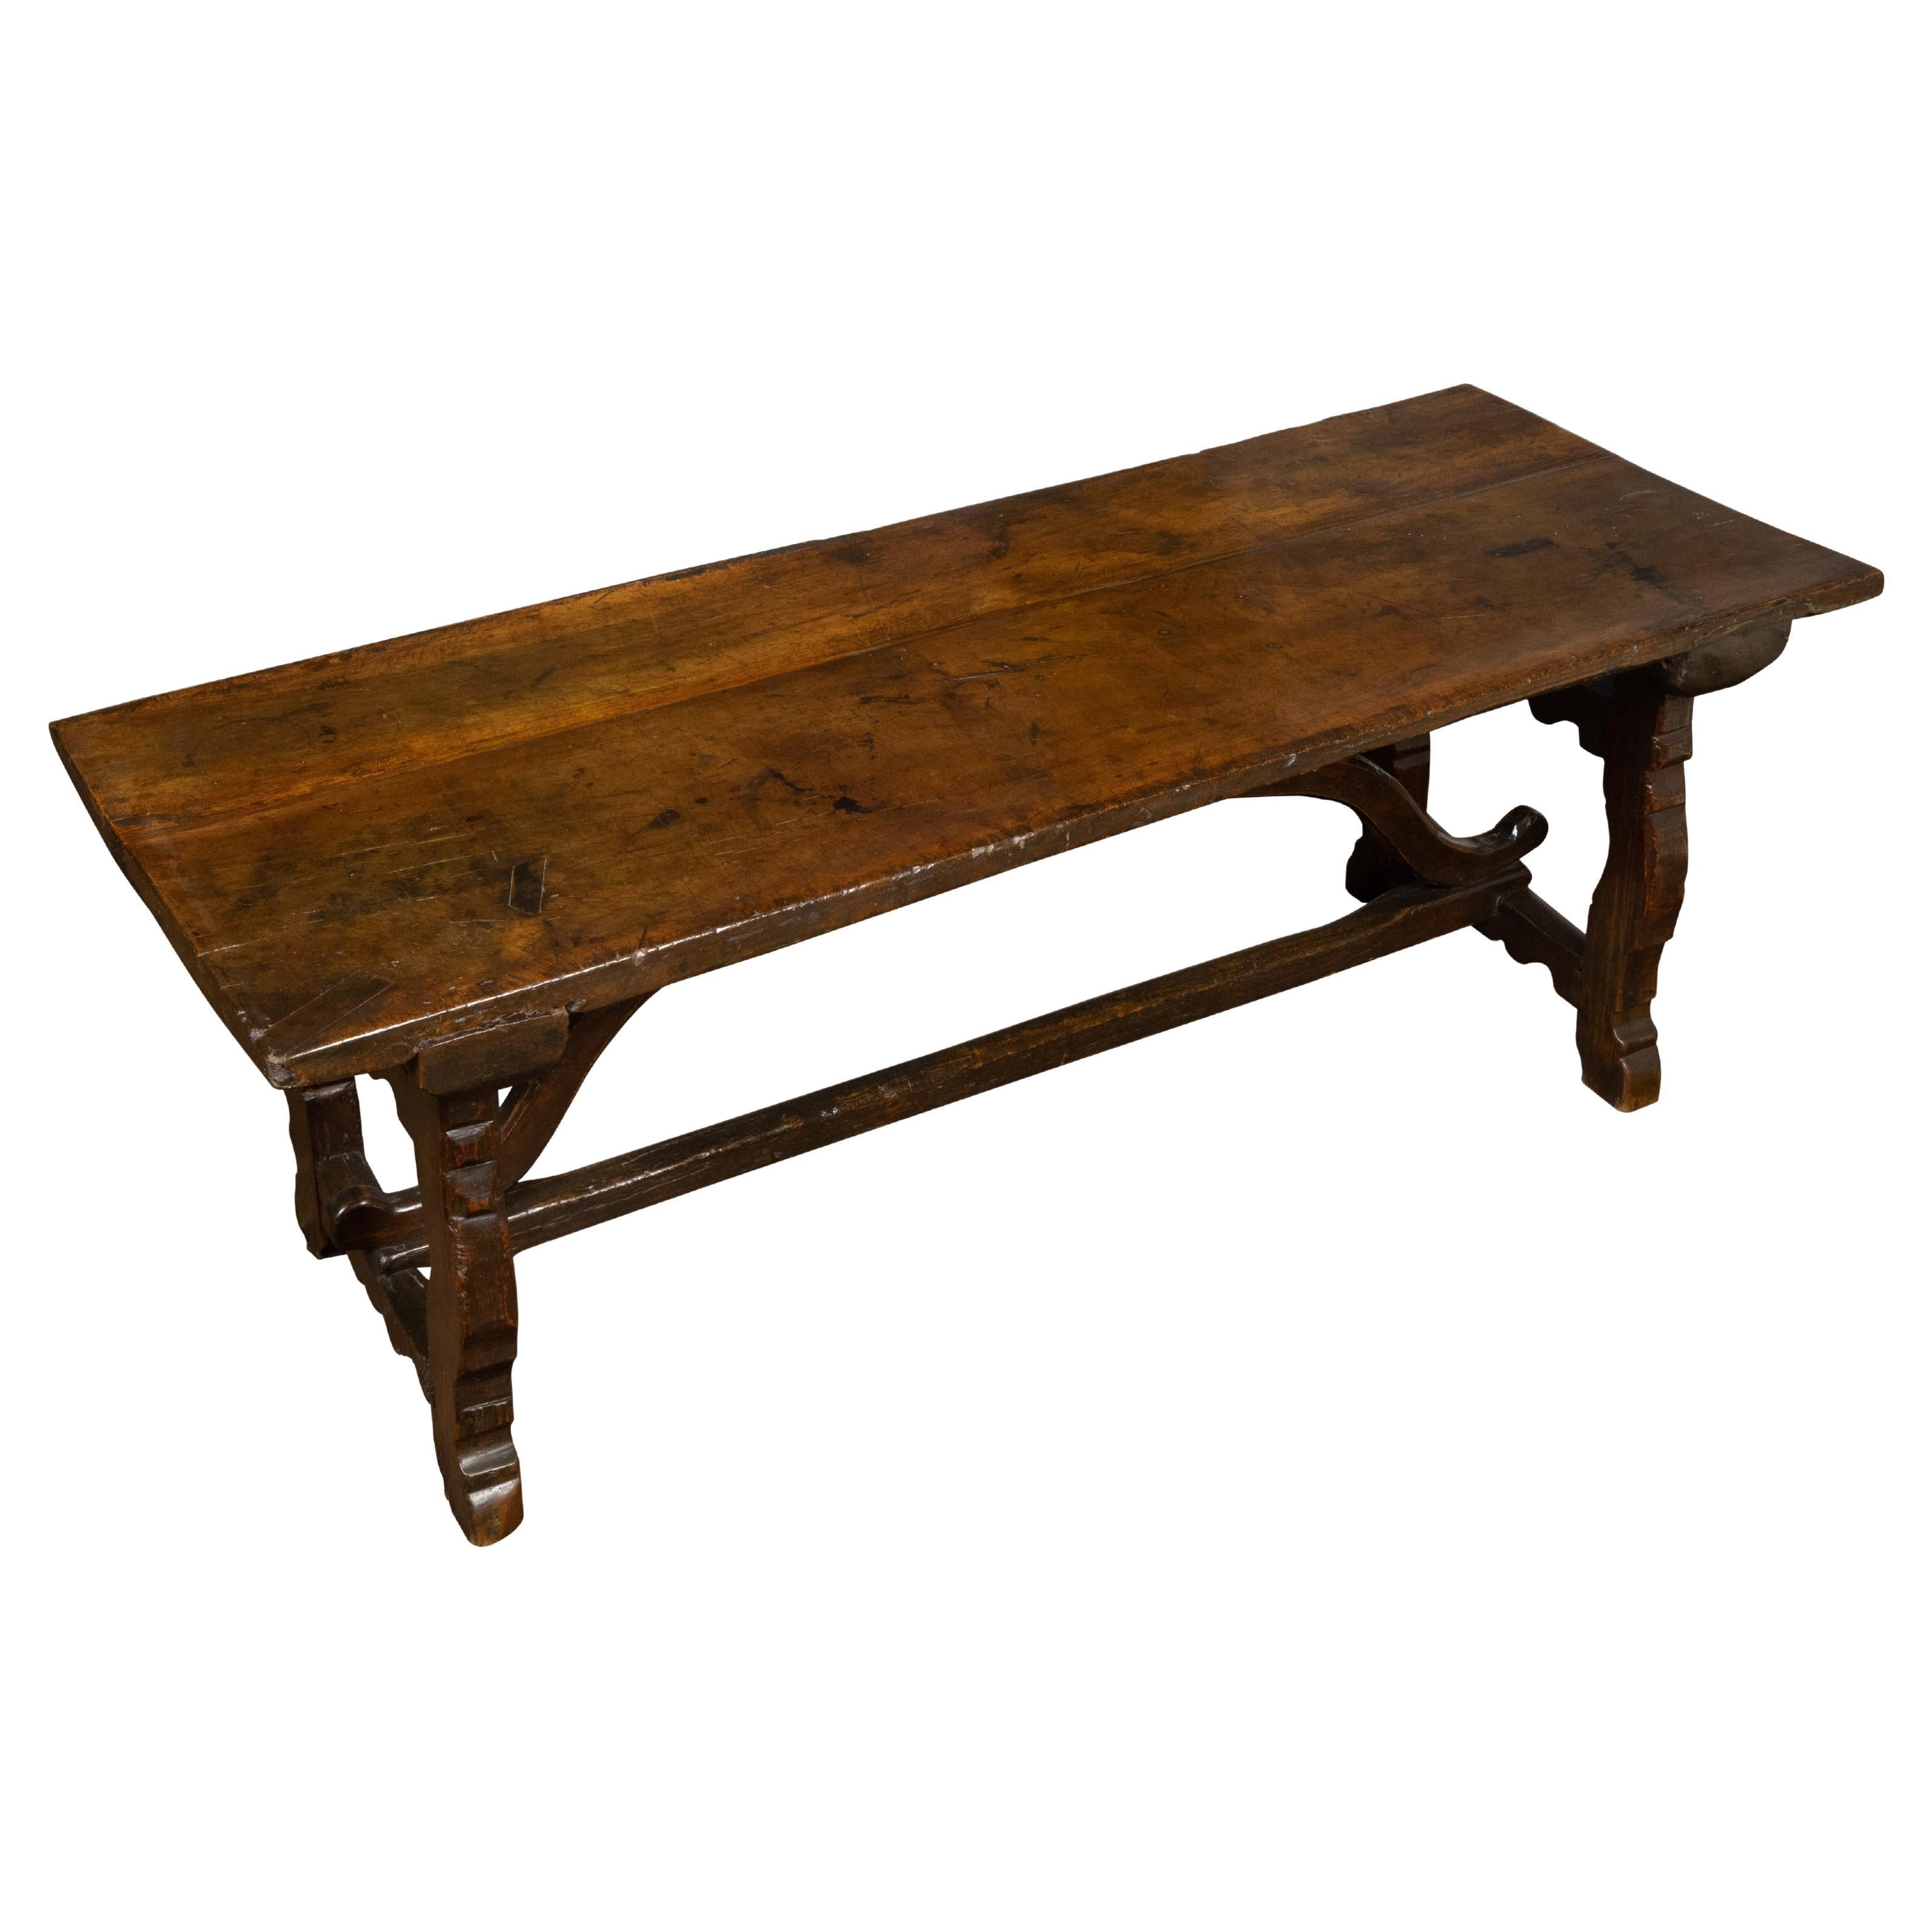 Rustic Italian 19th Century Walnut Farm Table with Carved Lyre-Shaped Base